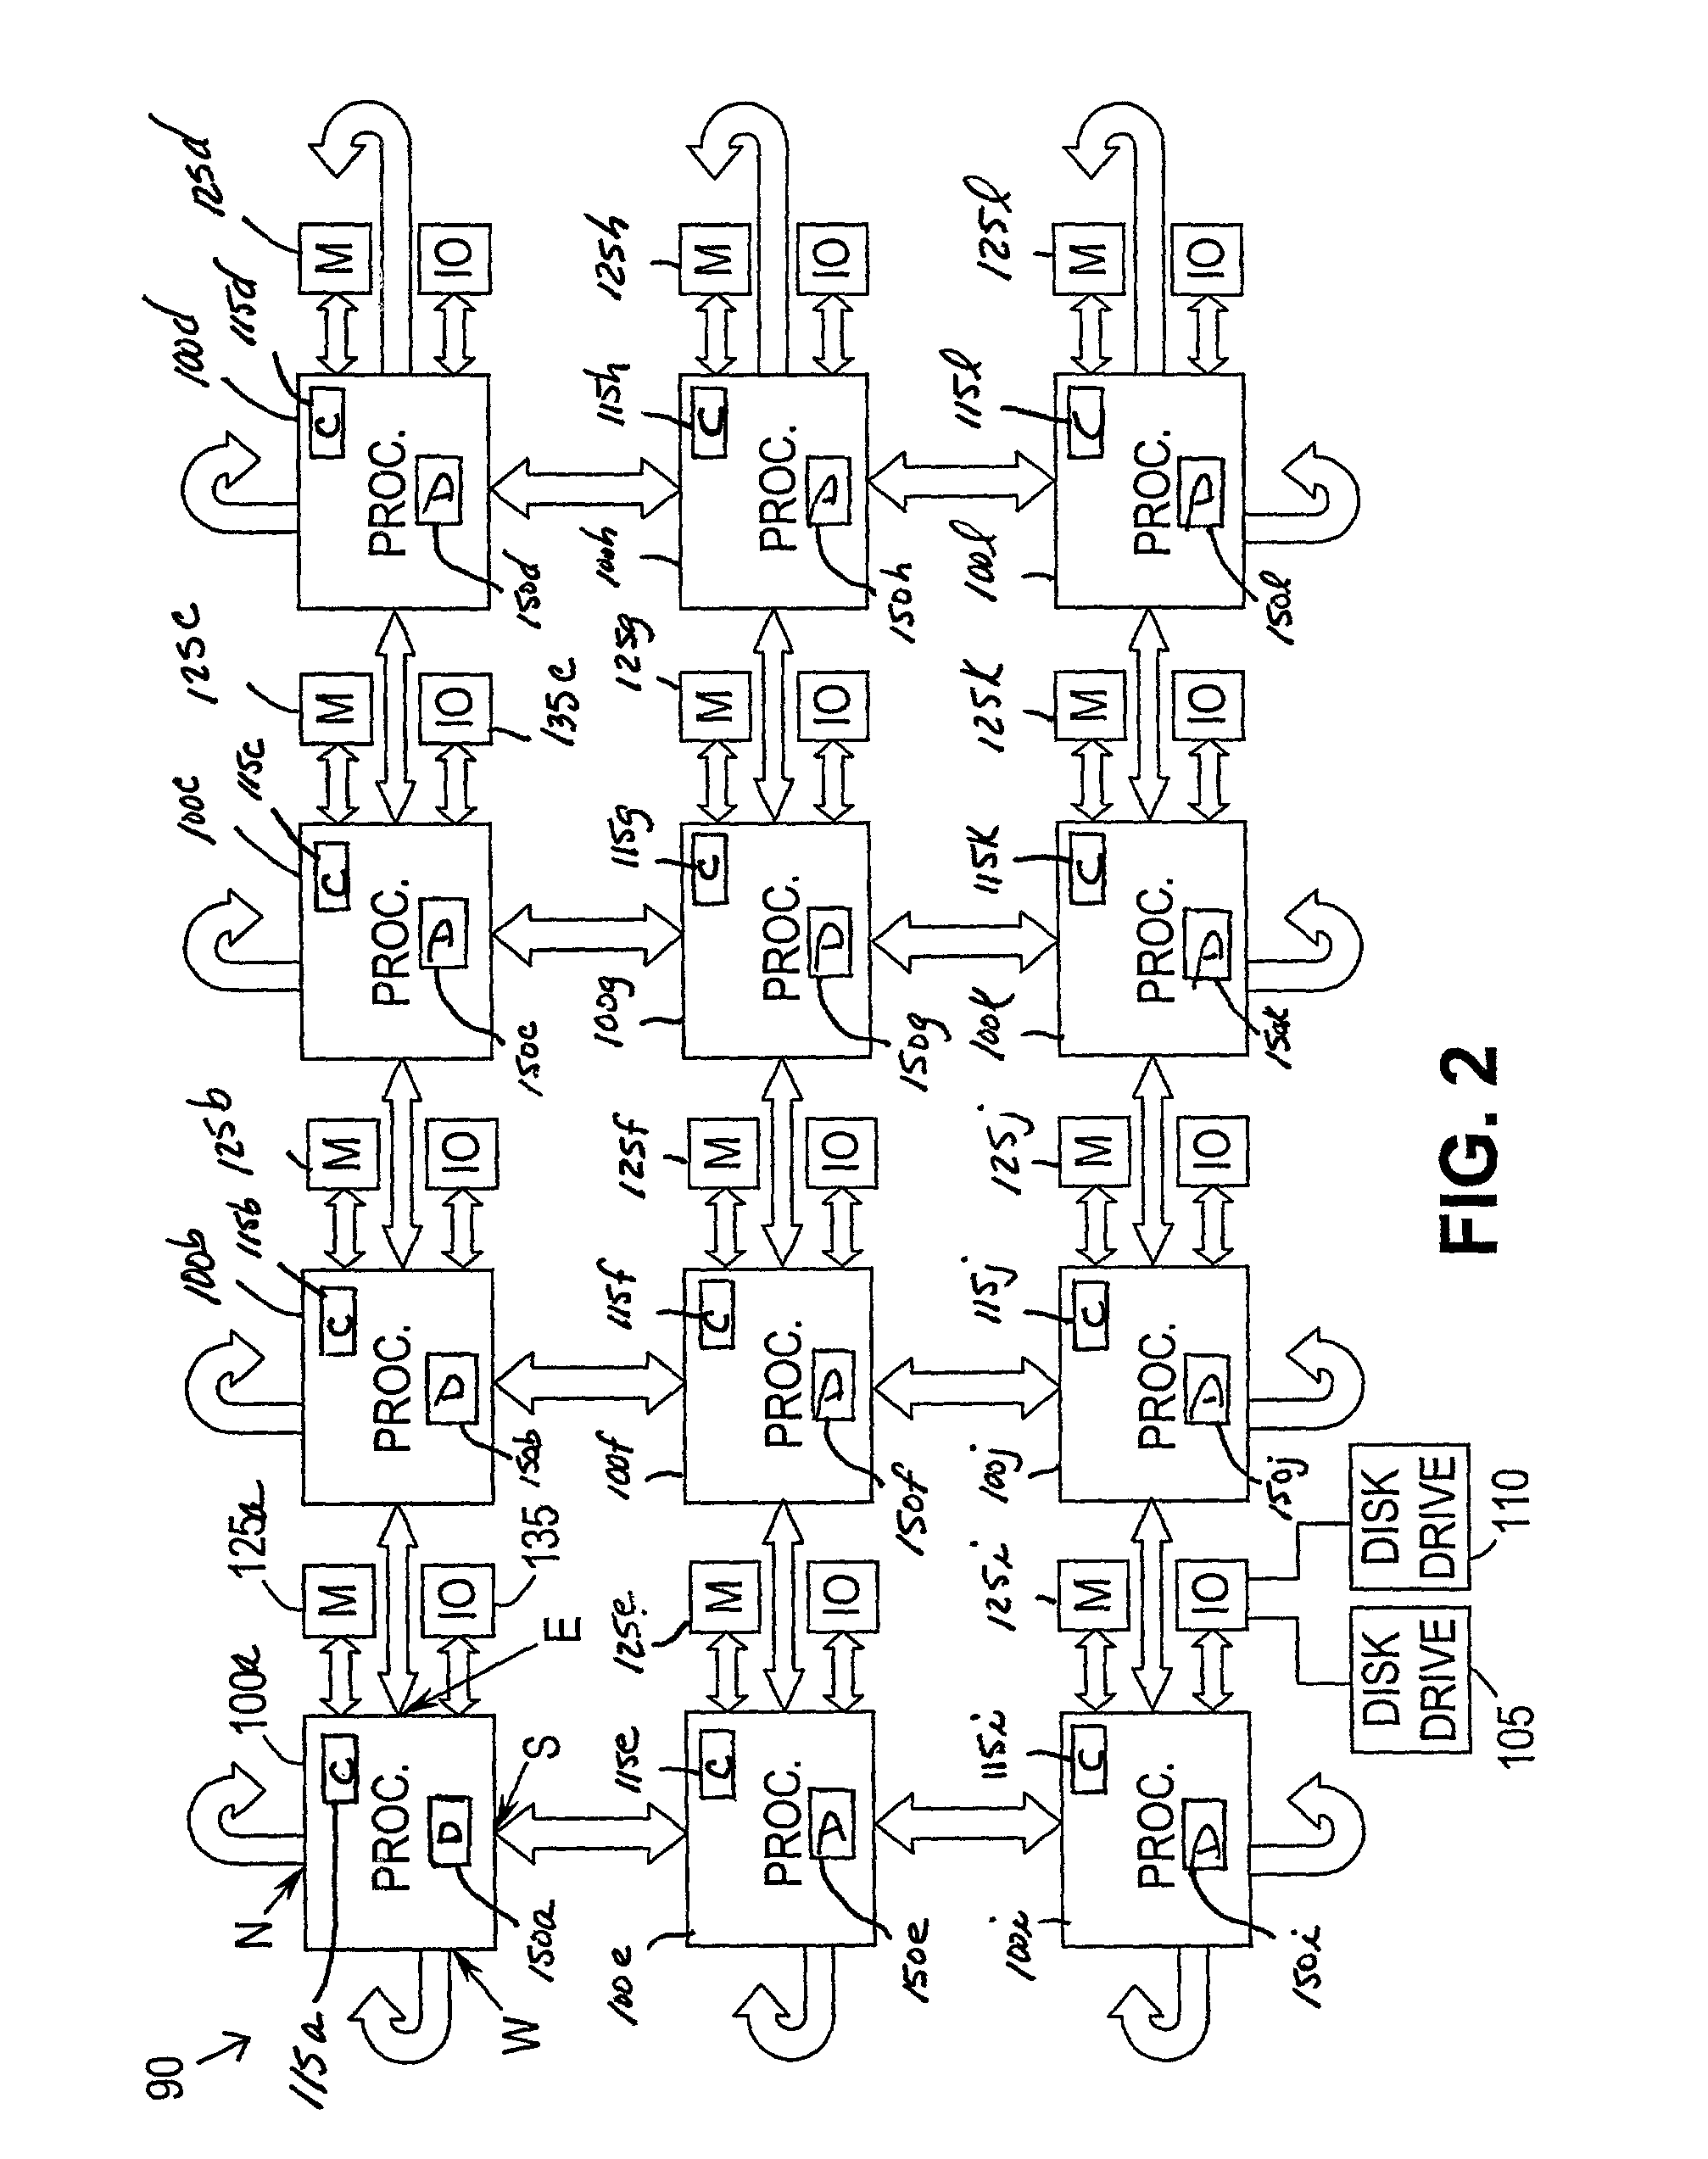 Mechanism for handling load lock/store conditional primitives in directory-based distributed shared memory multiprocessors